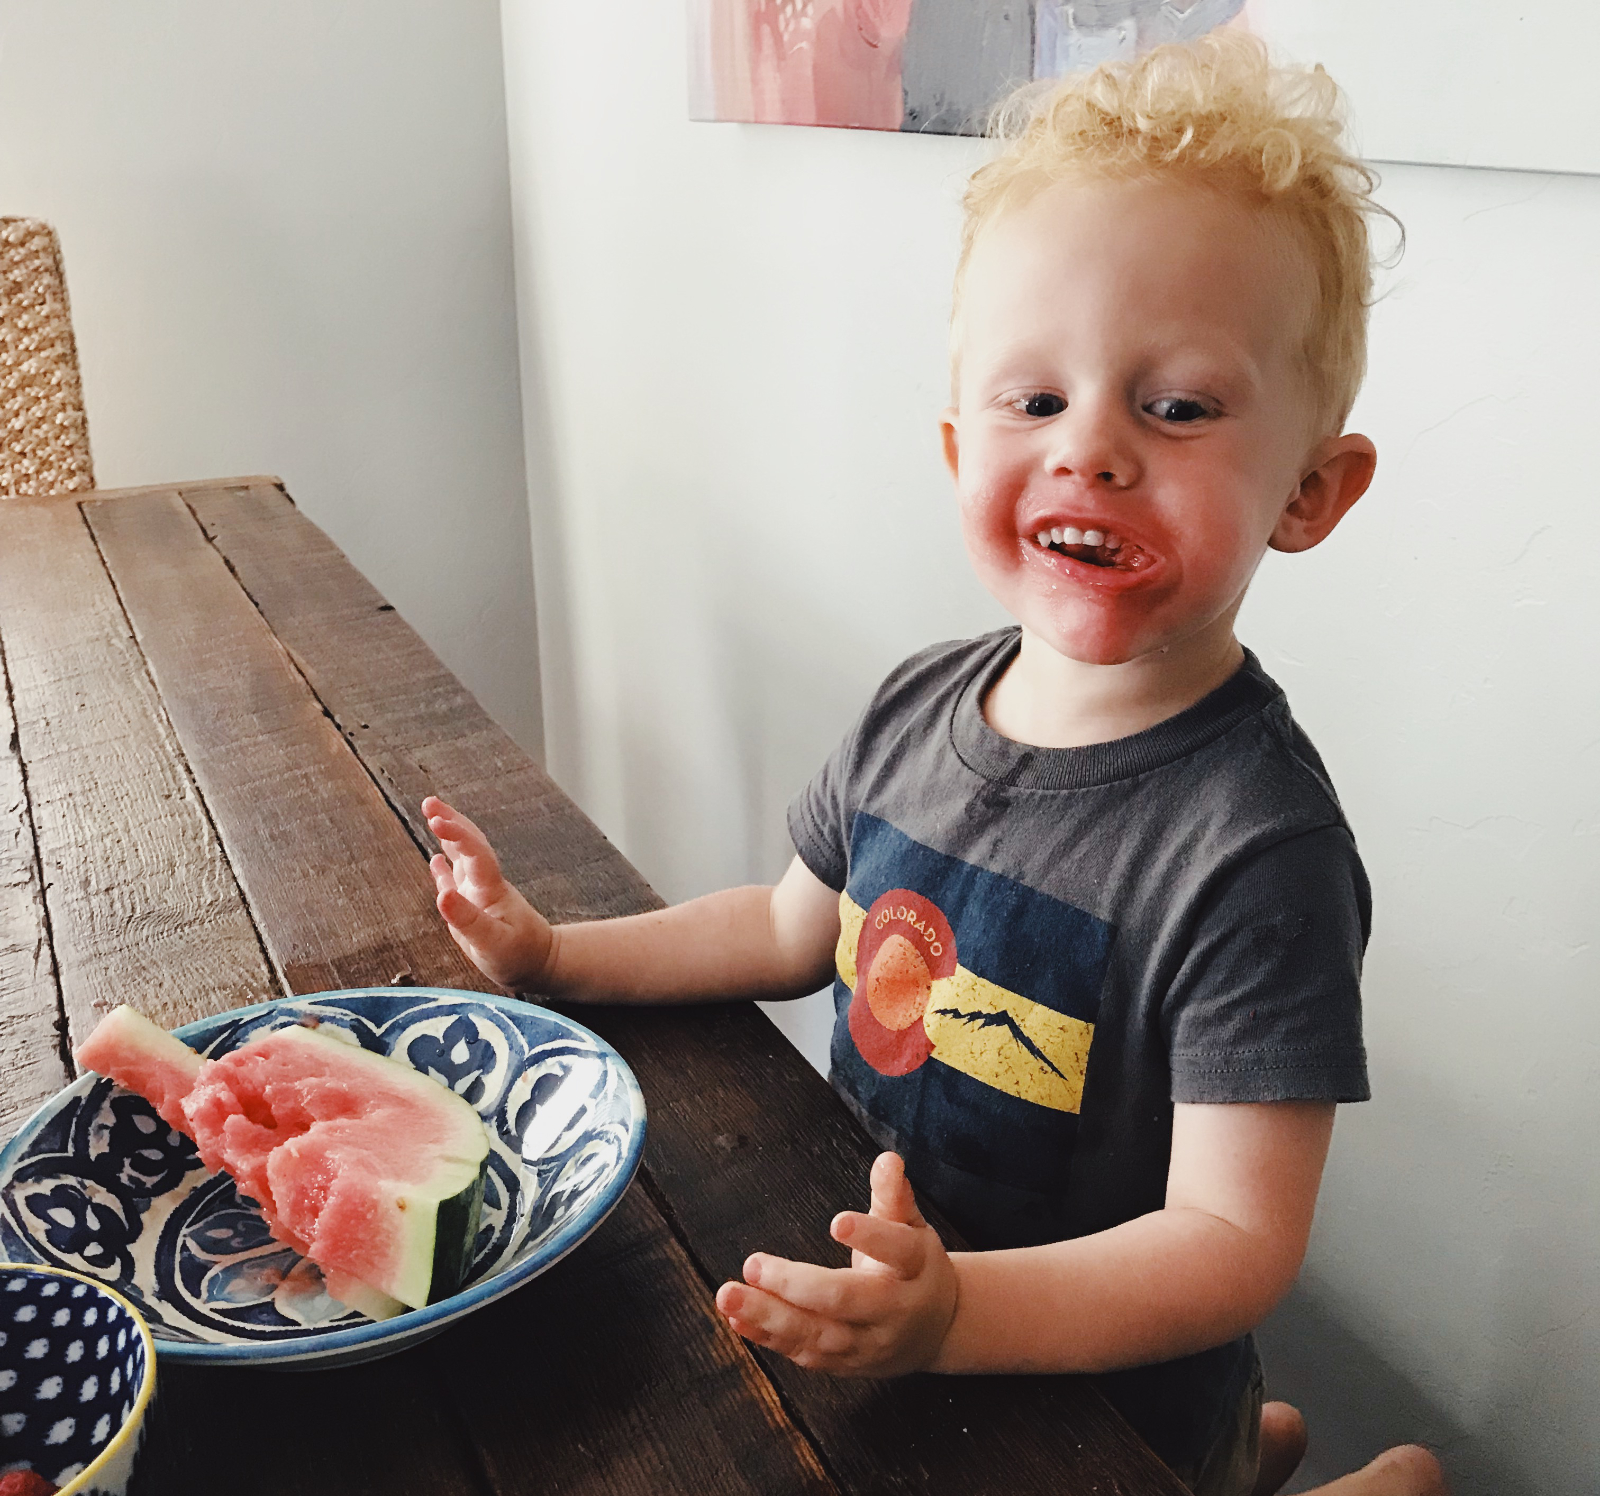 Healthy eating for kids. 4 things to keep in mind while trying to get your kids to eat healthy with Brooke Freeman, nutritional health coach and founder of nonprofit Natural Freedom Farm | For Animals For Earth